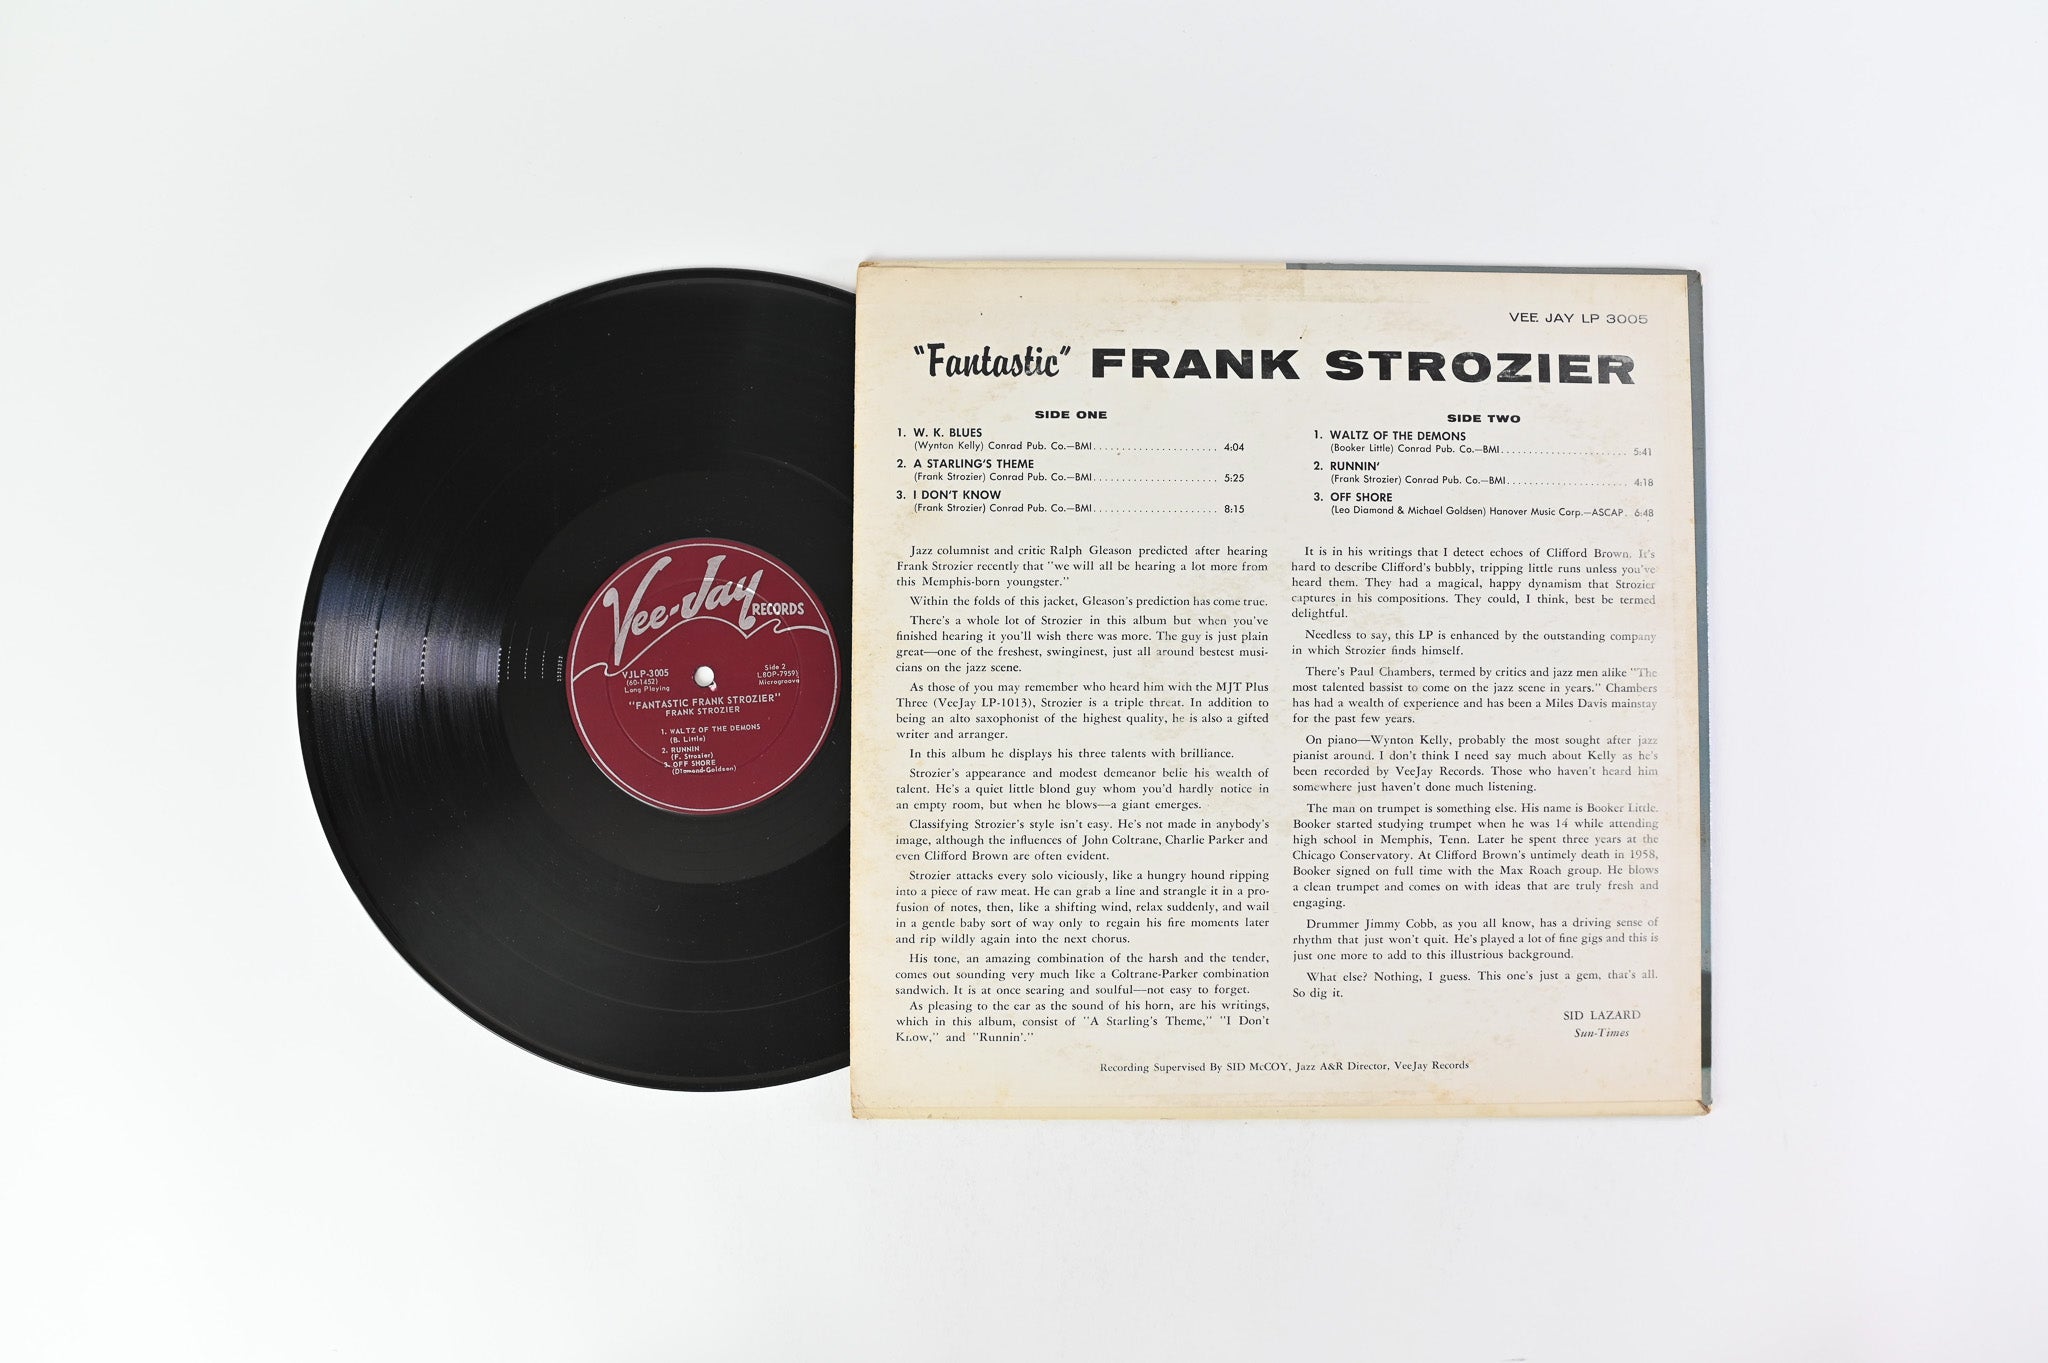 Frank Strozier - Fantastic Frank Strozier on Vee Jay Mono Deep Groove 1st Press